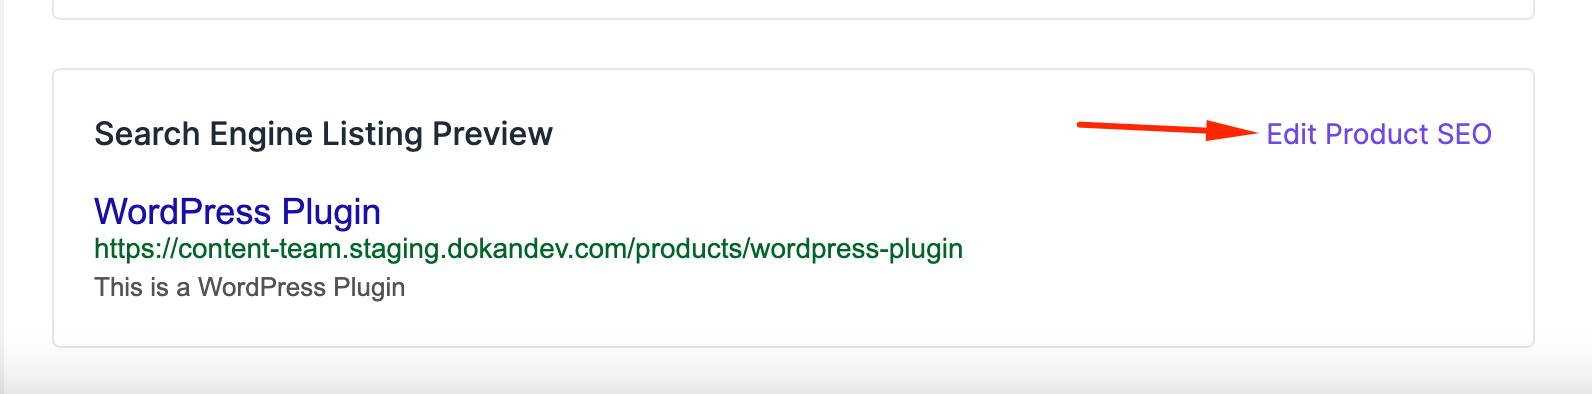 This is a screenshot for showing how to edit product SEO